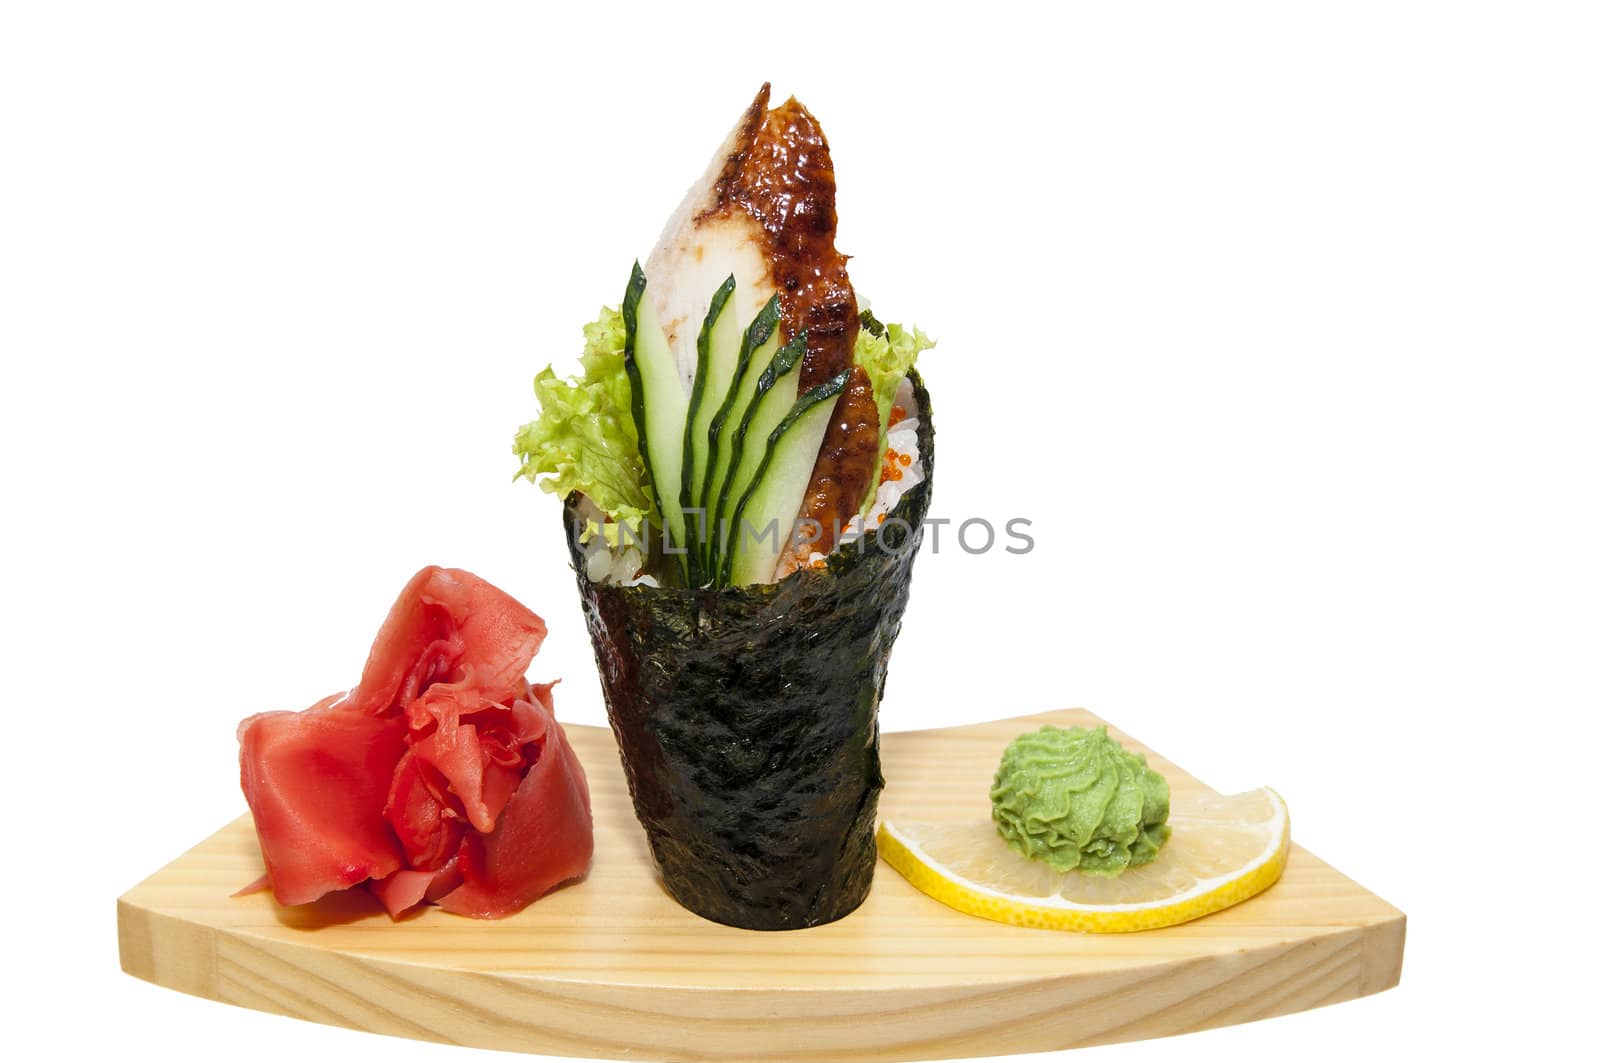 temaki by Lester120